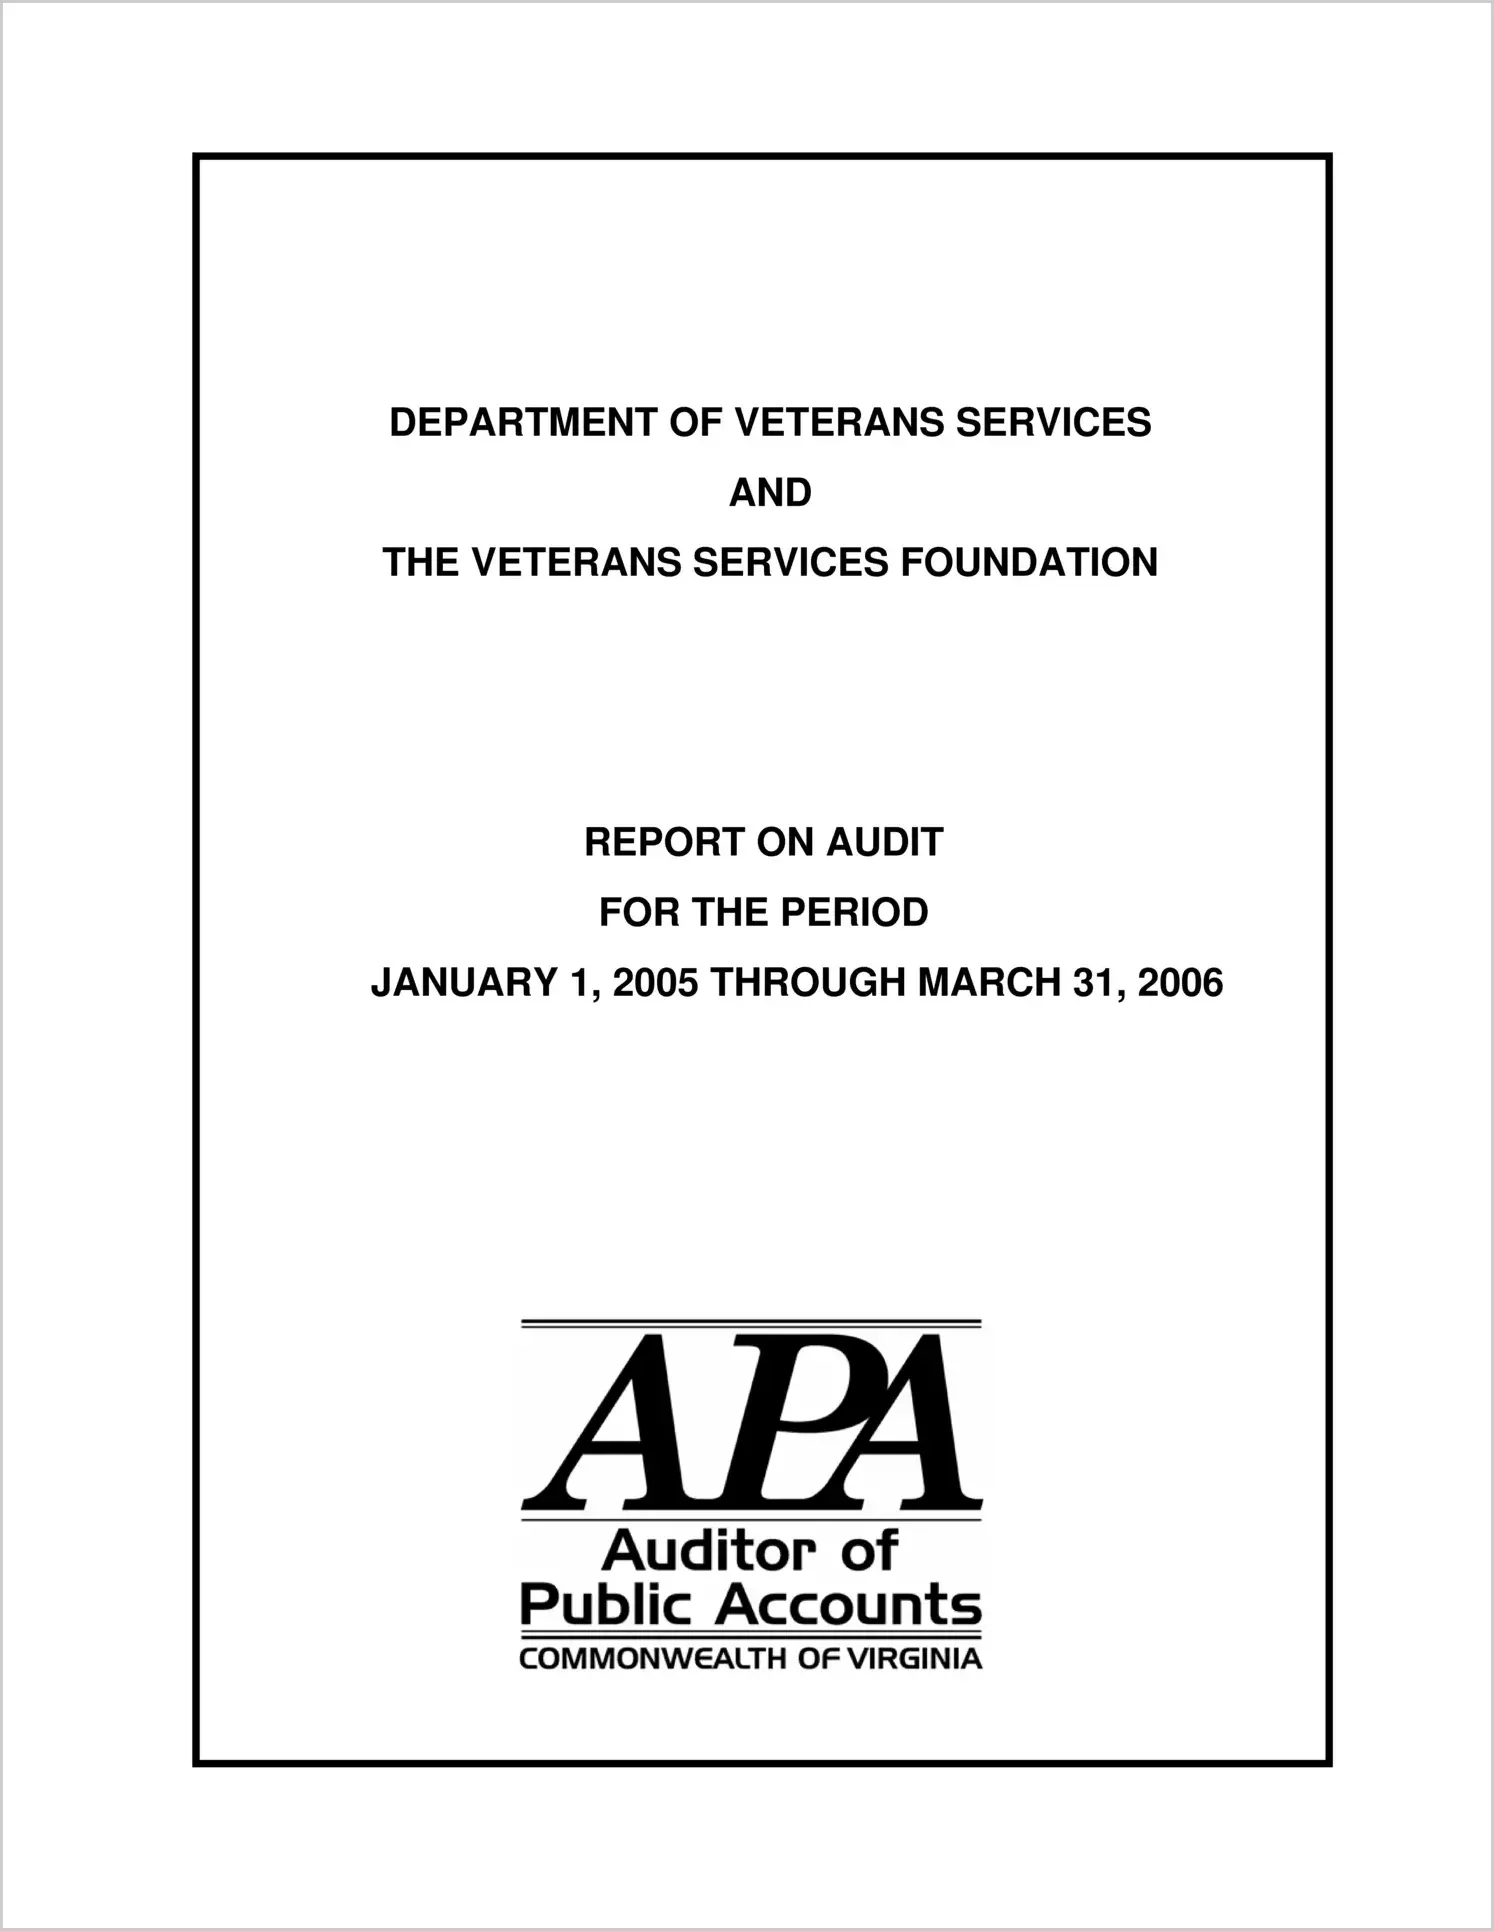 Department of Veterans Services and the Veterans Services Foundation for the period January 1, 2005 through March 31, 2006